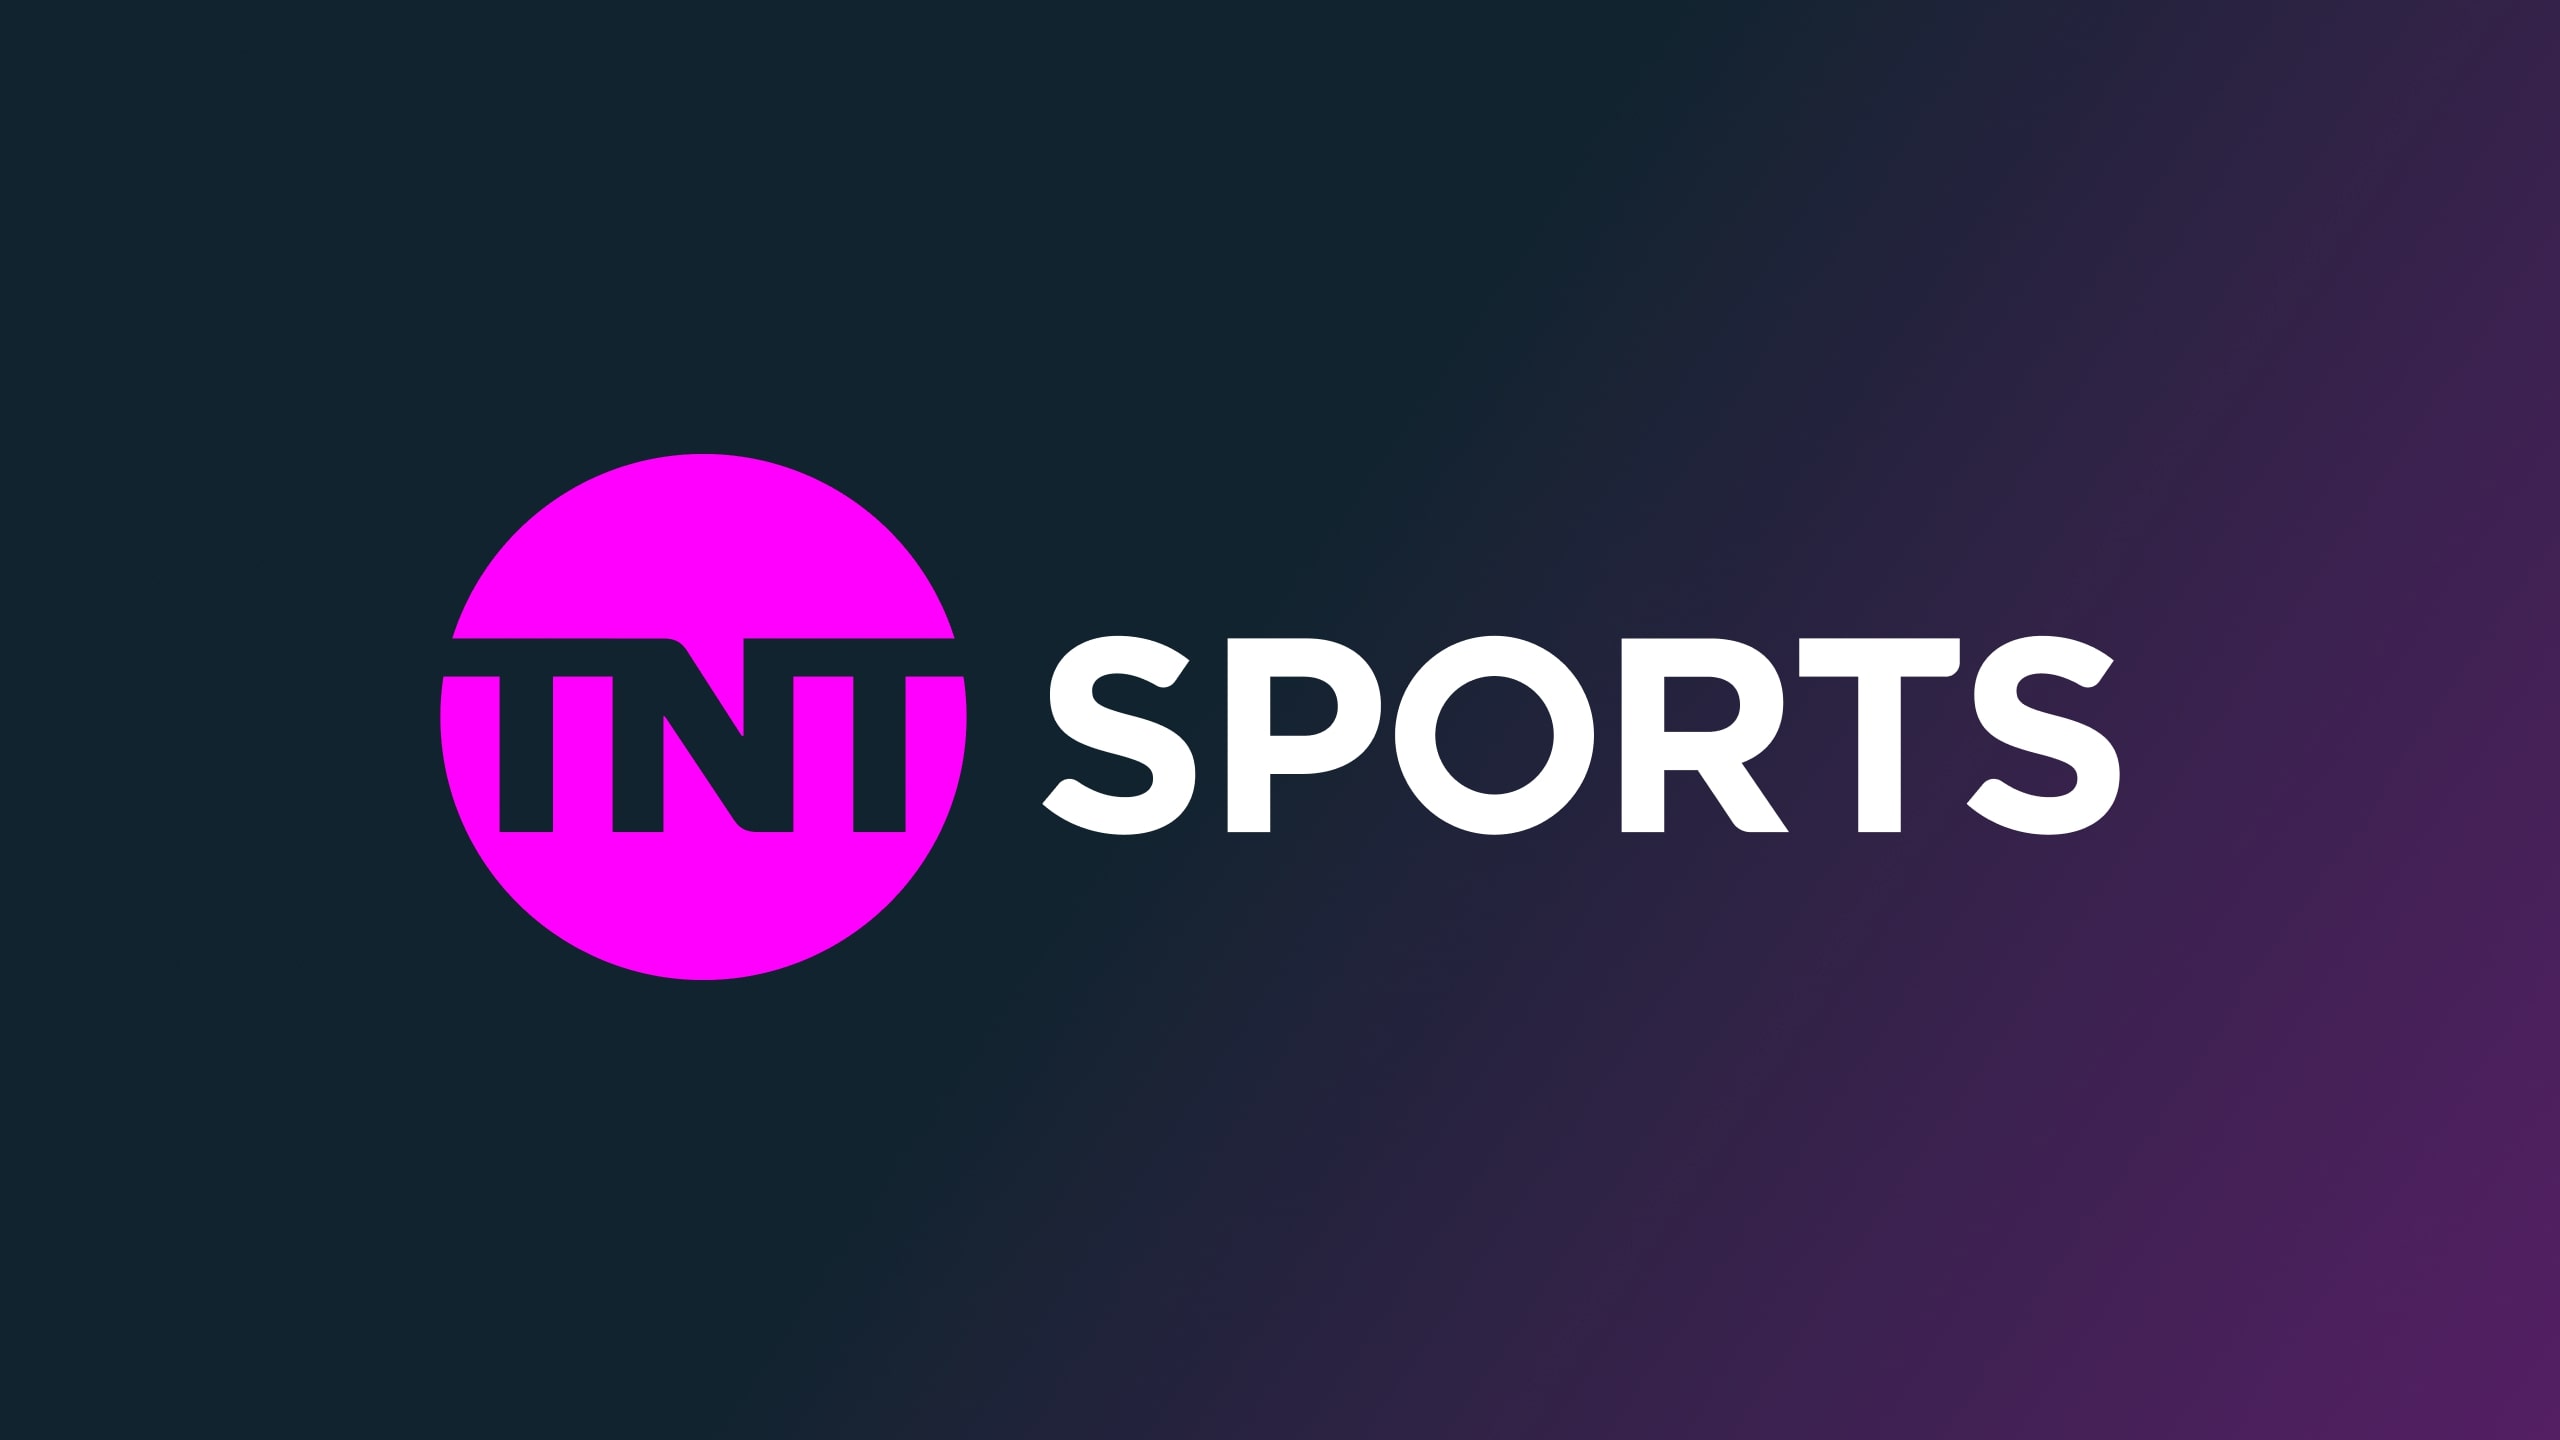 How to watch Freiburg vs West Ham UEFA Europa League match on TNT Sports, live stream and TV details